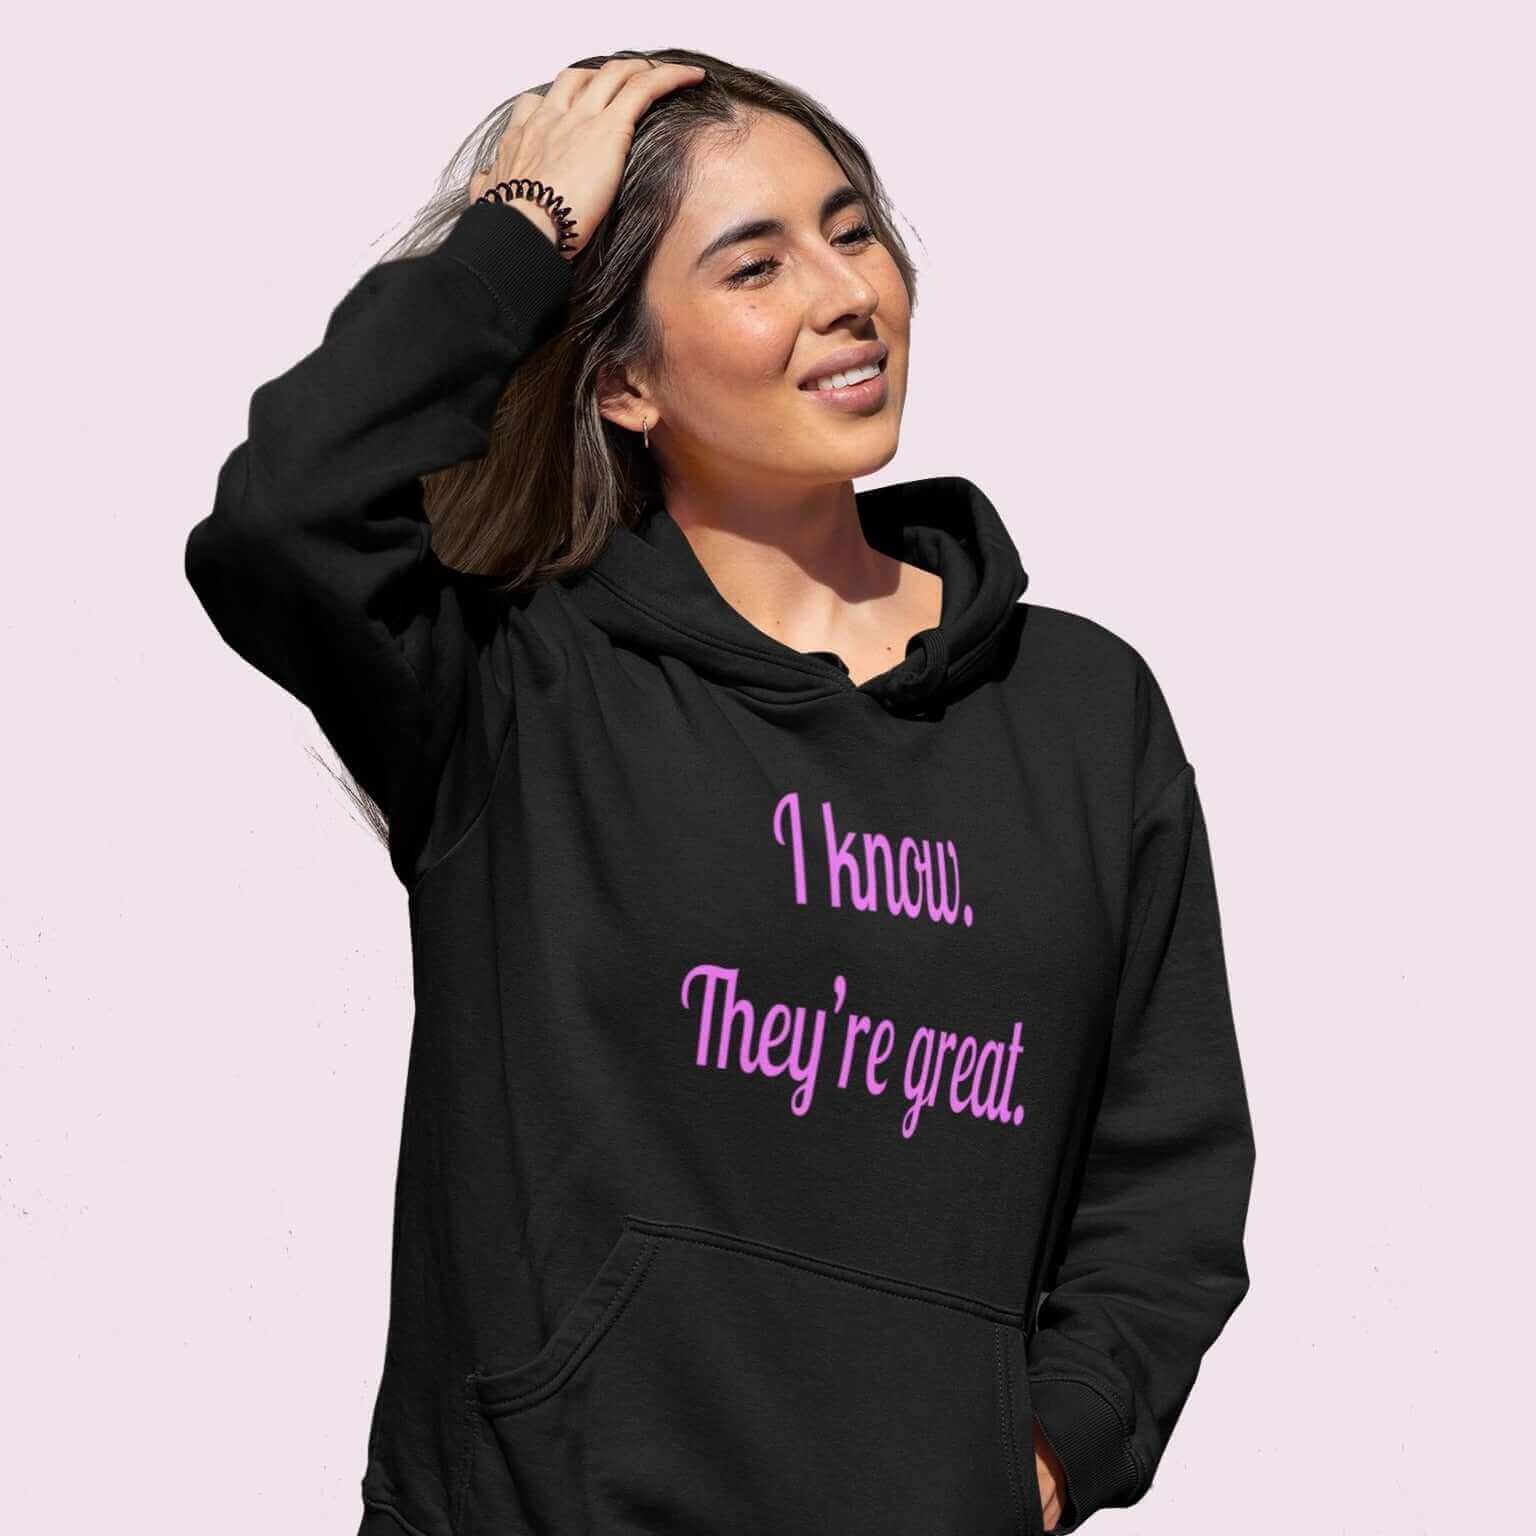 woman wearing hoodie with great boobs